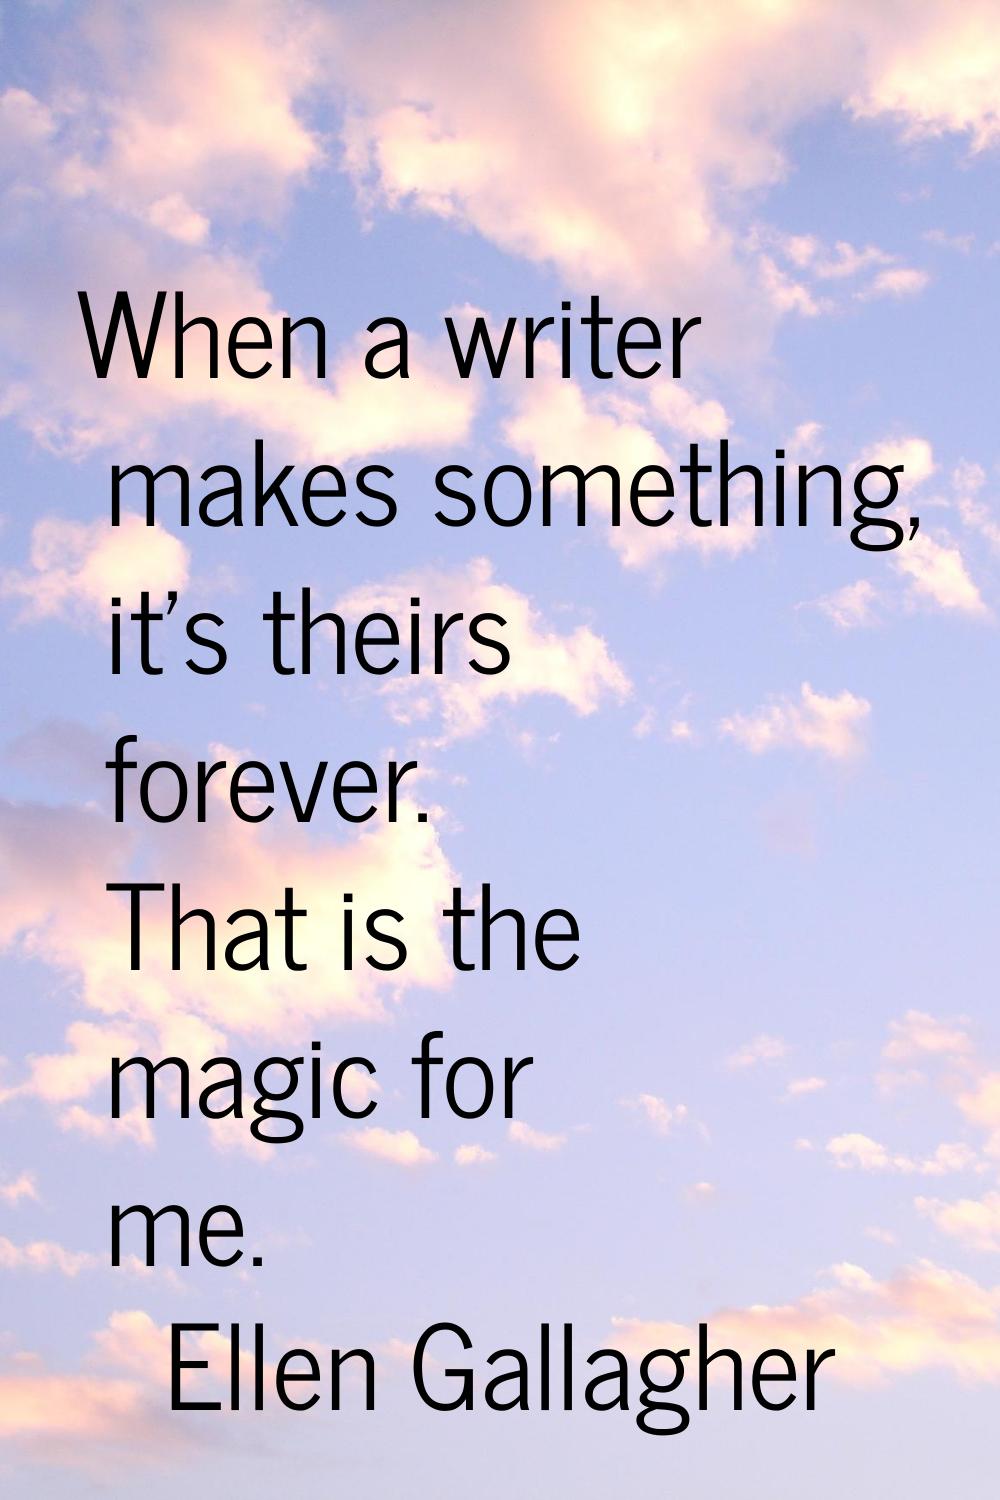 When a writer makes something, it's theirs forever. That is the magic for me.